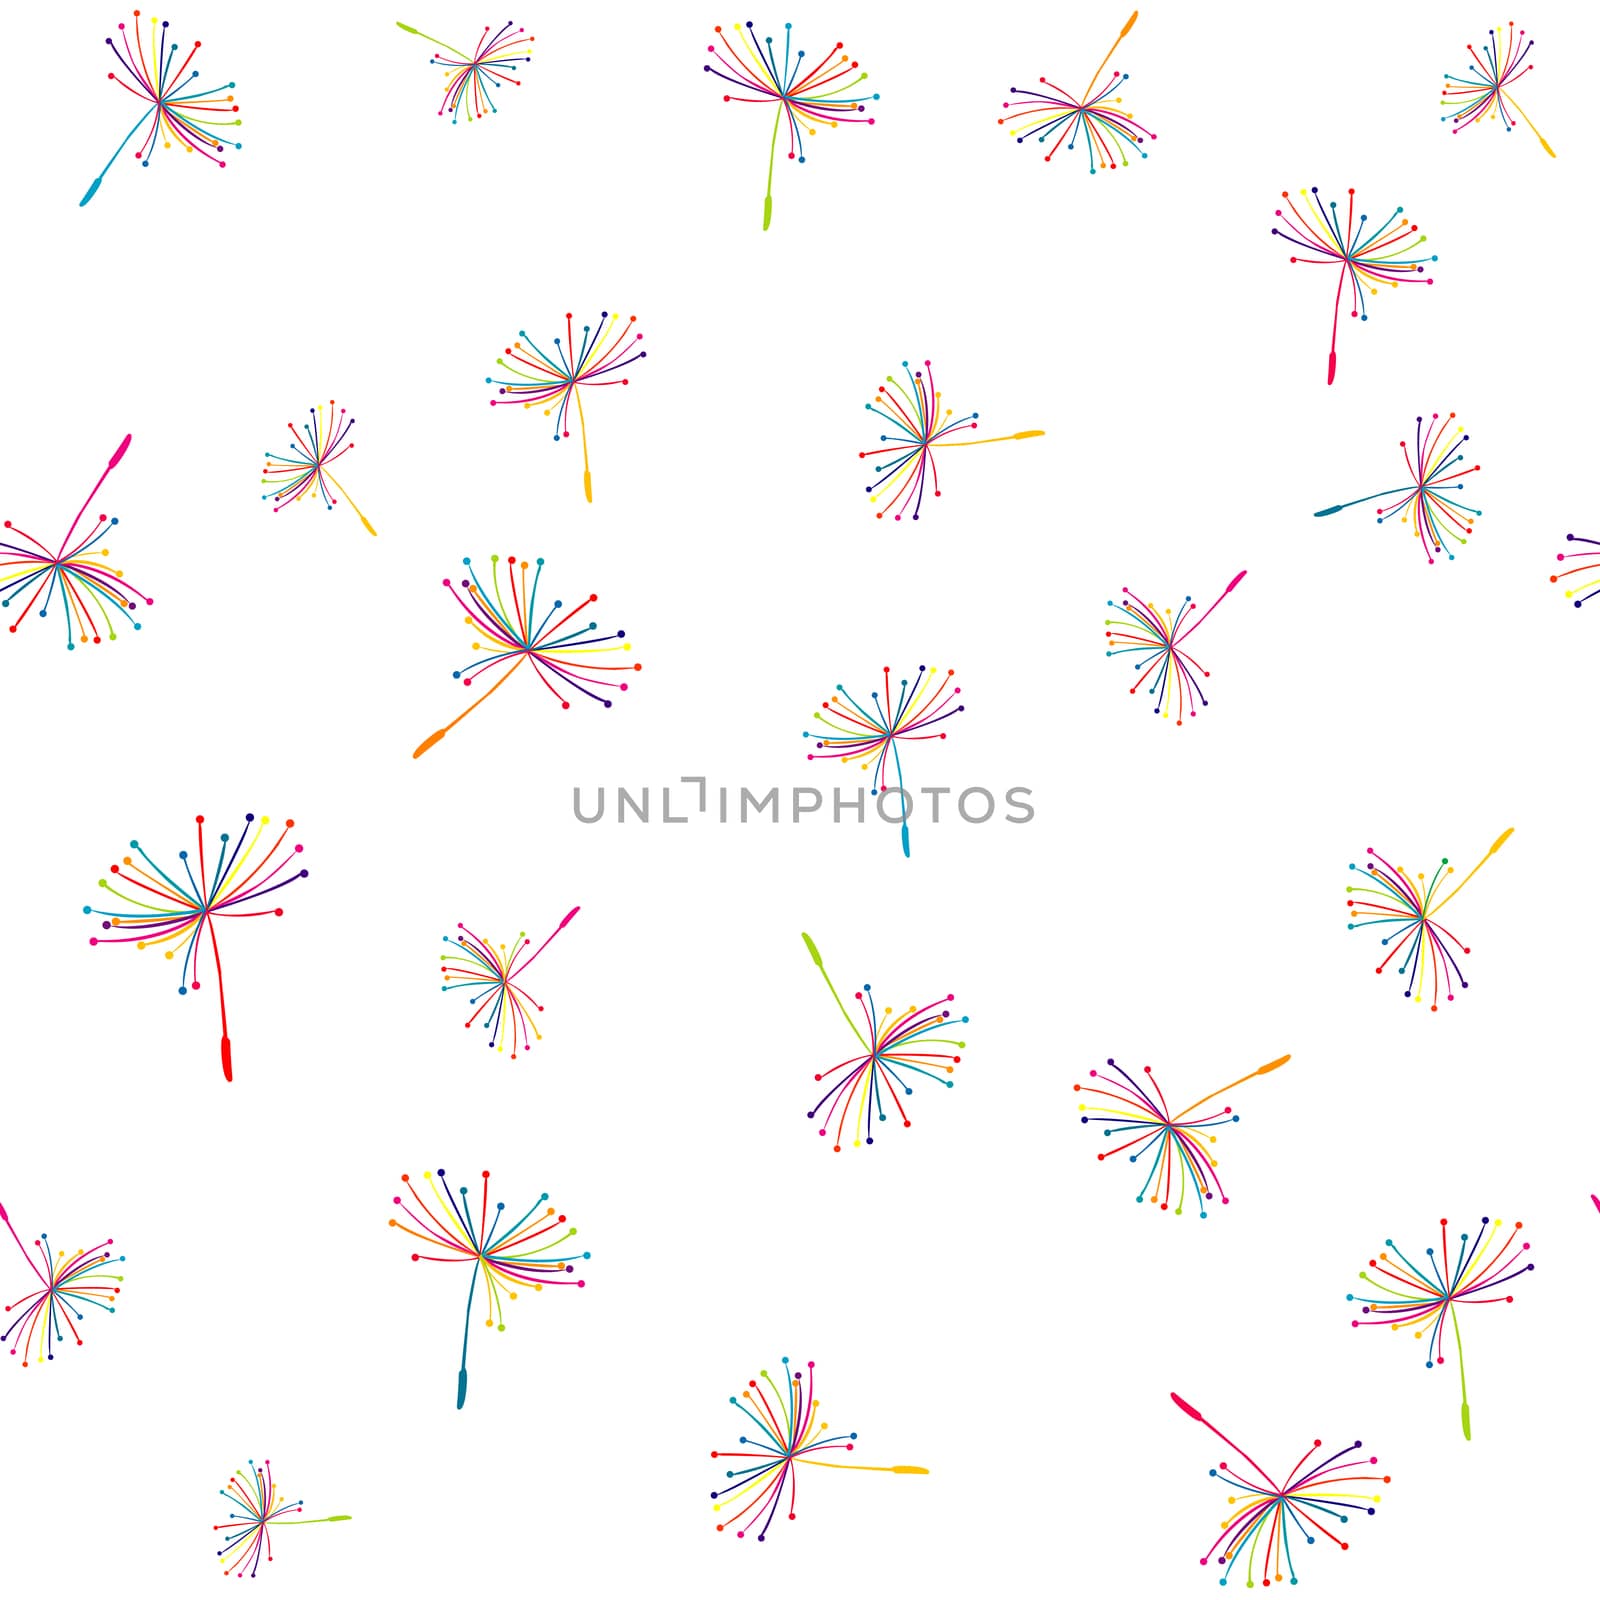 Seamless pattern with colorful flying dandelion seeds by hibrida13